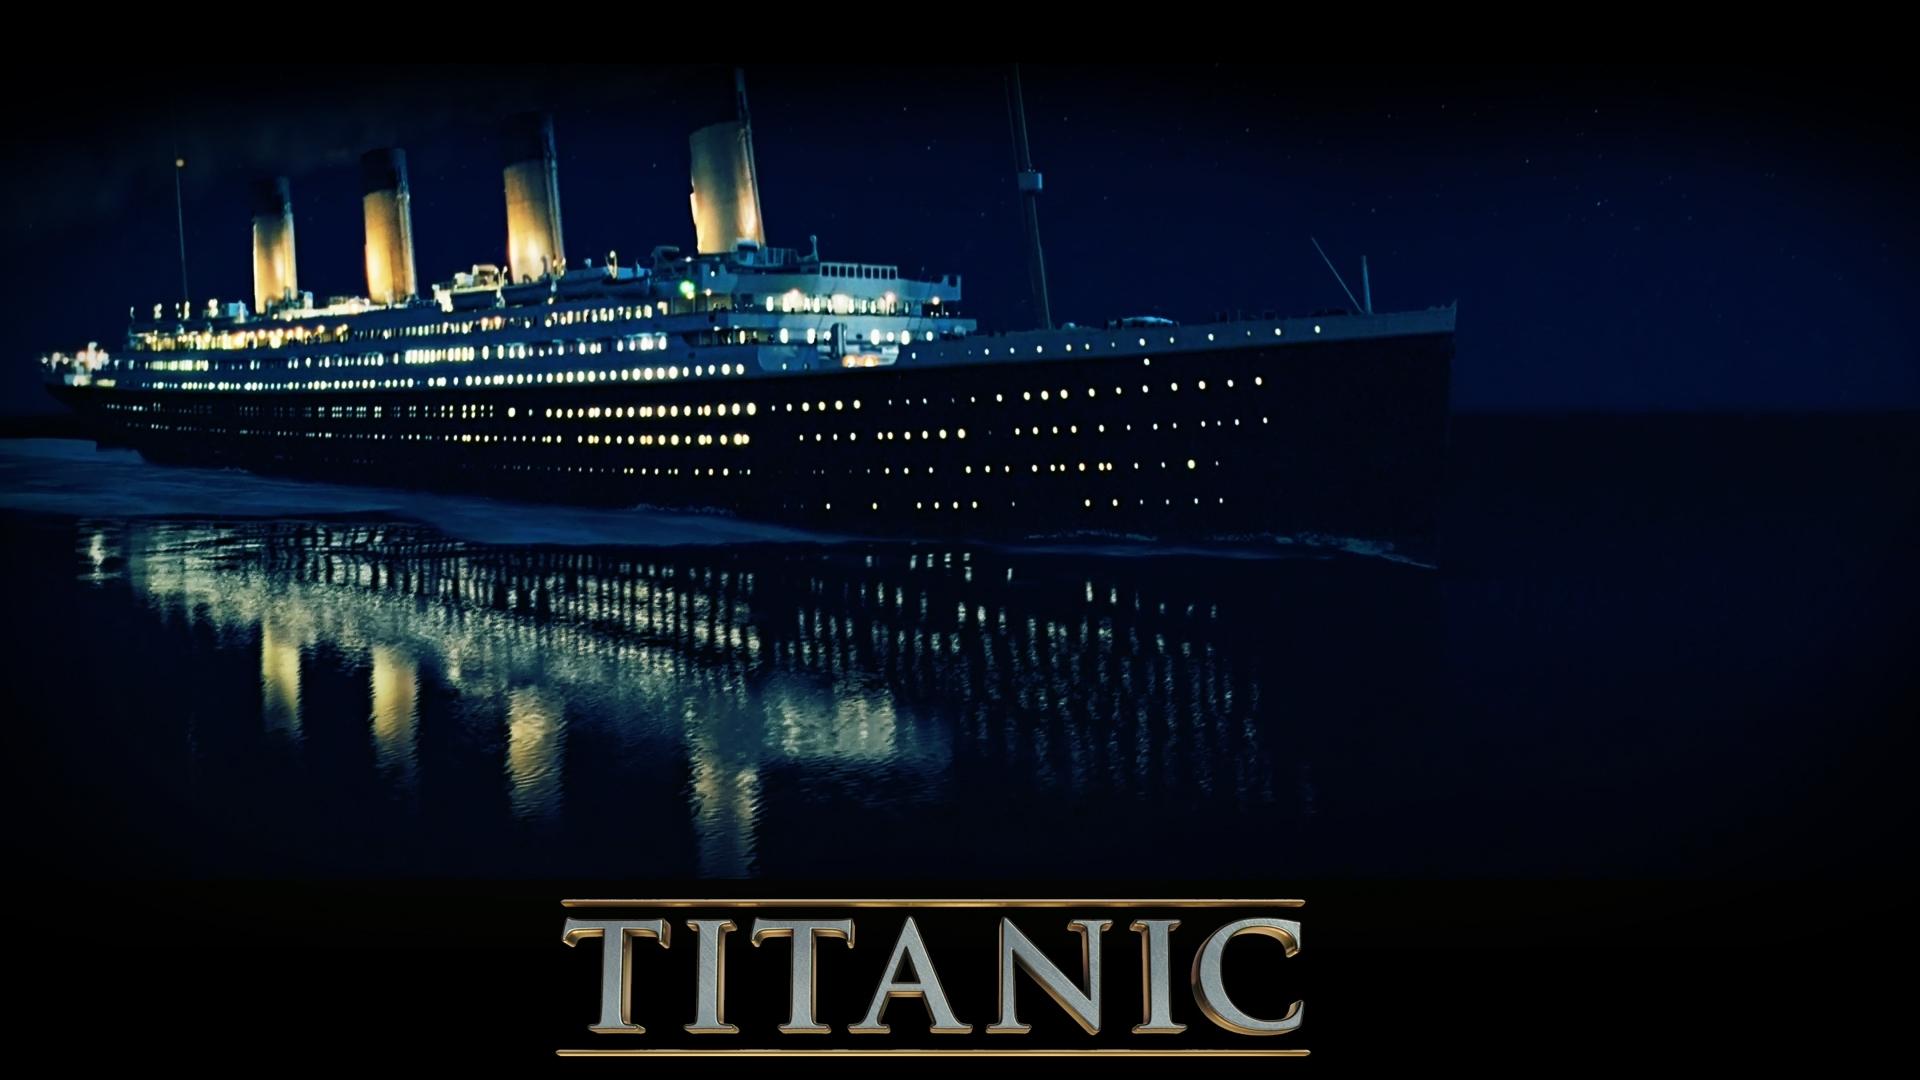 Titanic Wallpapers Backgrounds with quality HD